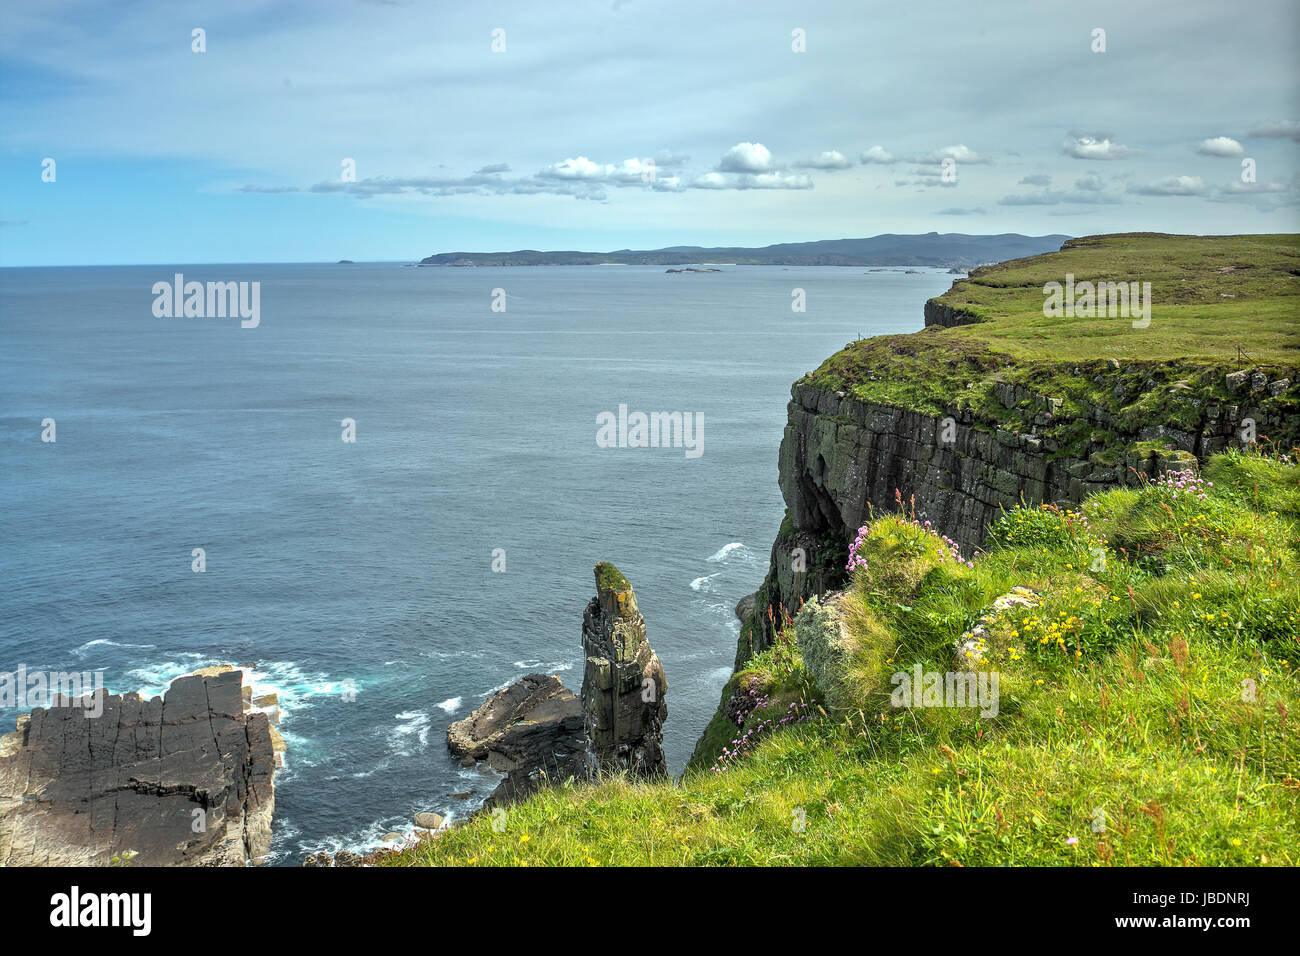 A clifftop view from the lovely Handa Island in the north-west of Scotland.   The Island has important seabird colonies. Stock Photo